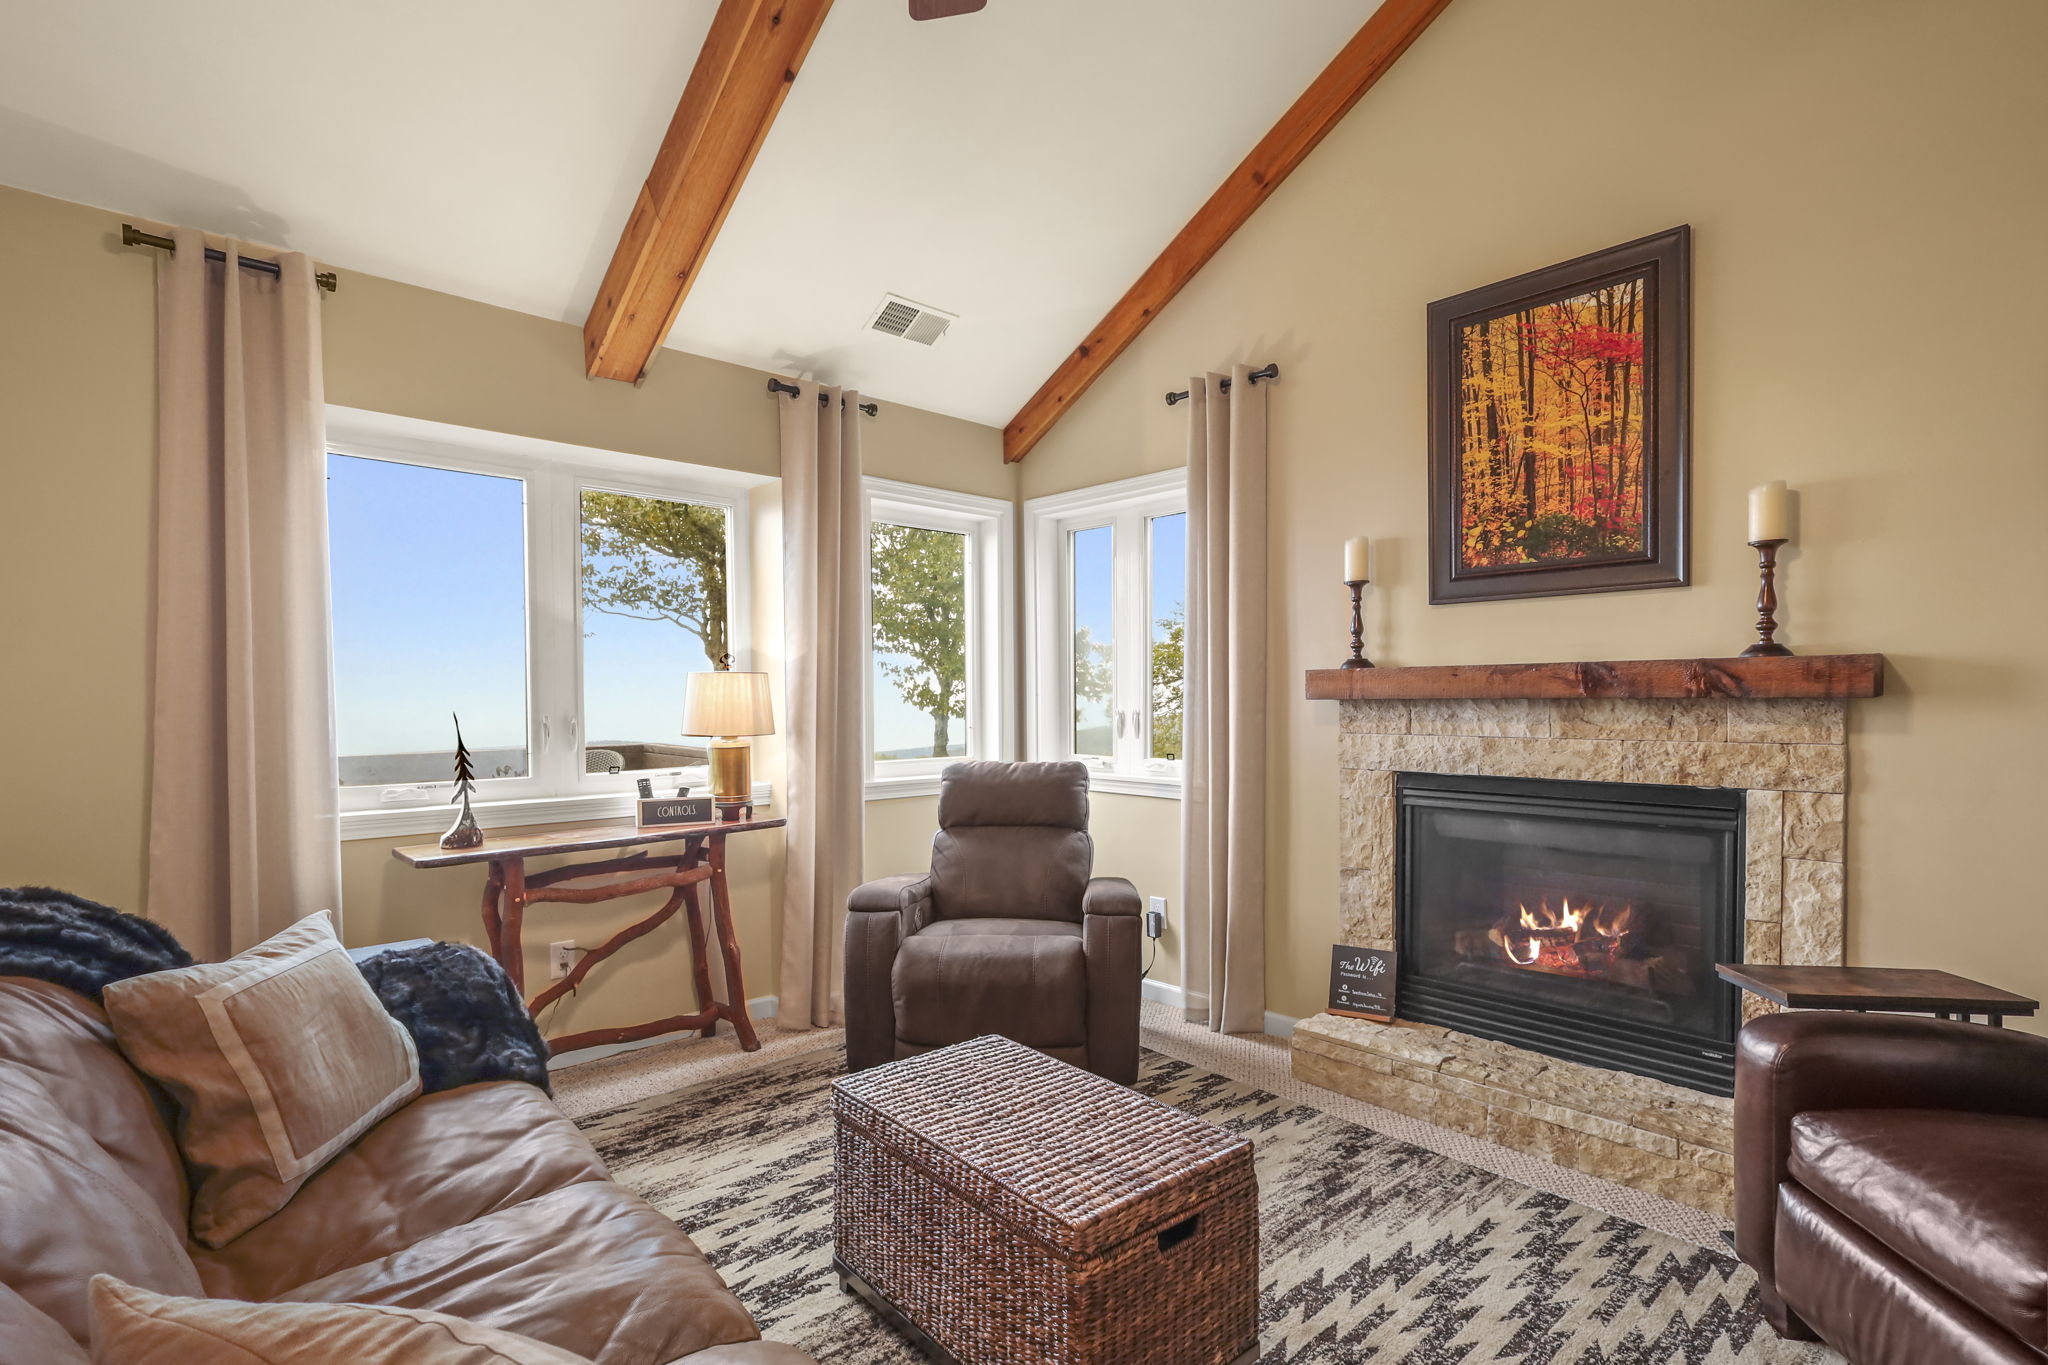 Savor the beauty of expansive mountain vistas right from your living room sanctuary!